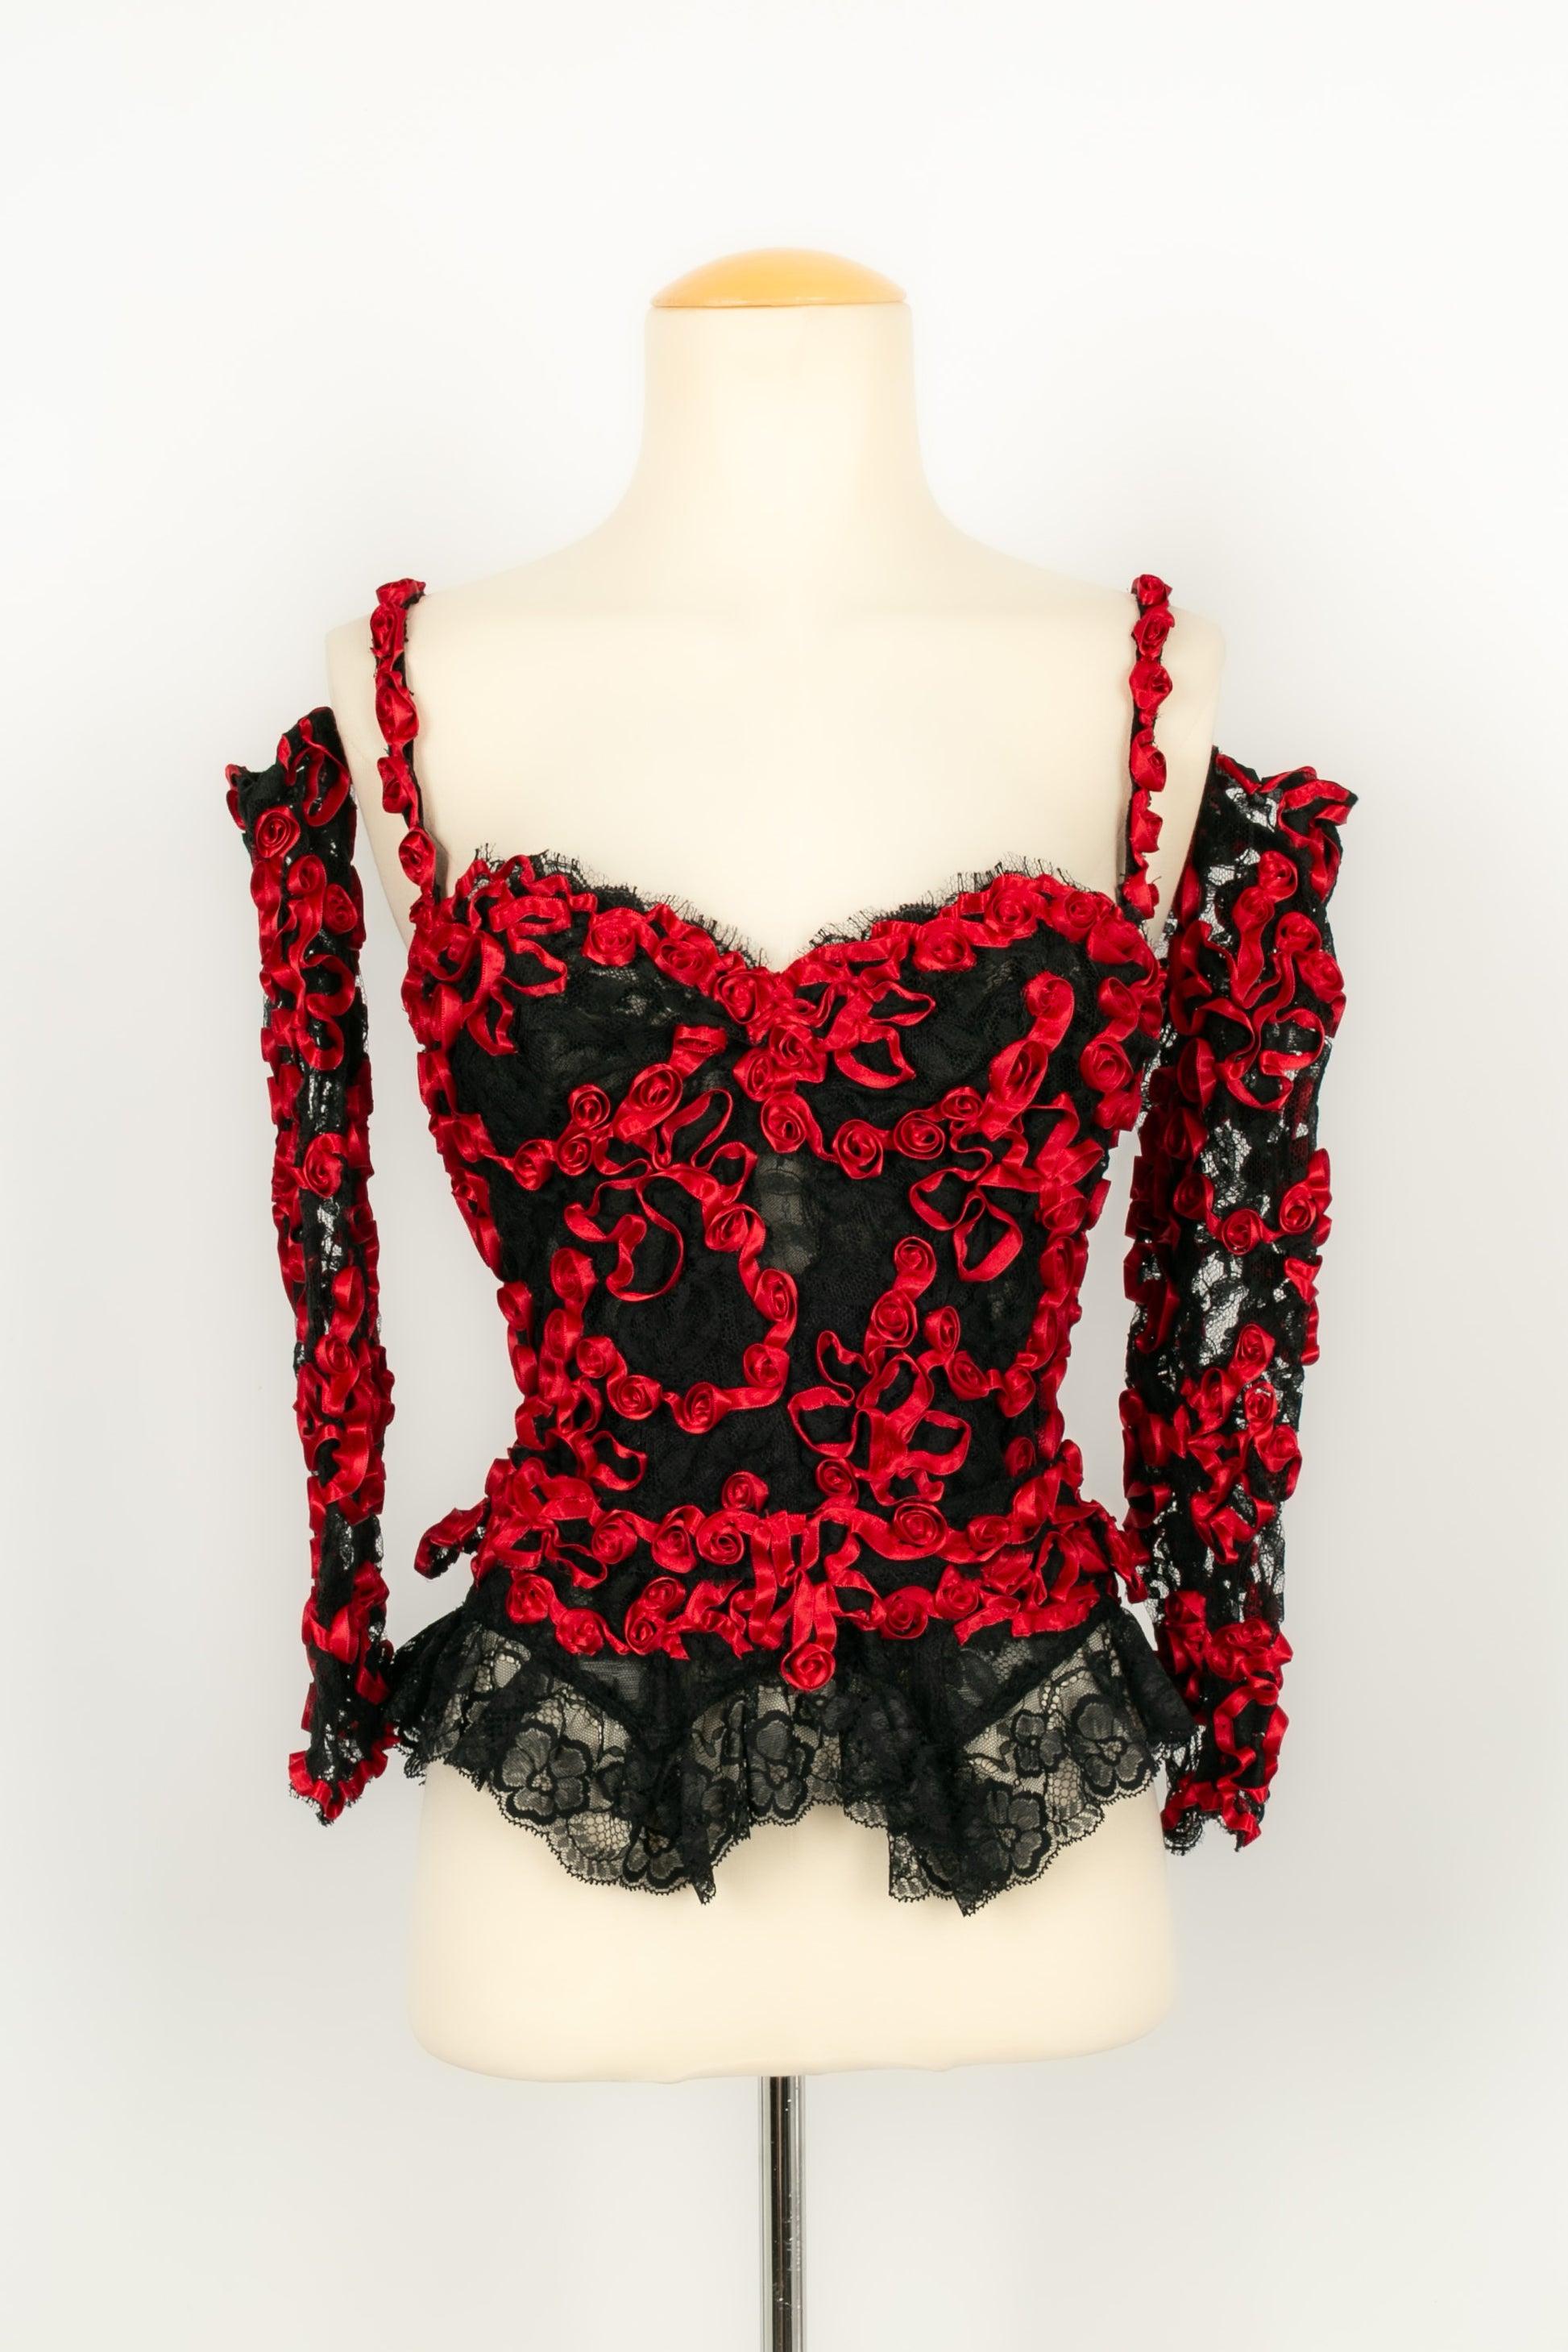 Valentino - Lingerie-style black lace top with red ribbons. It comes with a pair of fingerless gloves. No size label, it fits a 36FR.

Additional information:
Condition: Very good condition
Dimensions: Chest: 37 cm - Length: 54 cm

Seller Reference: